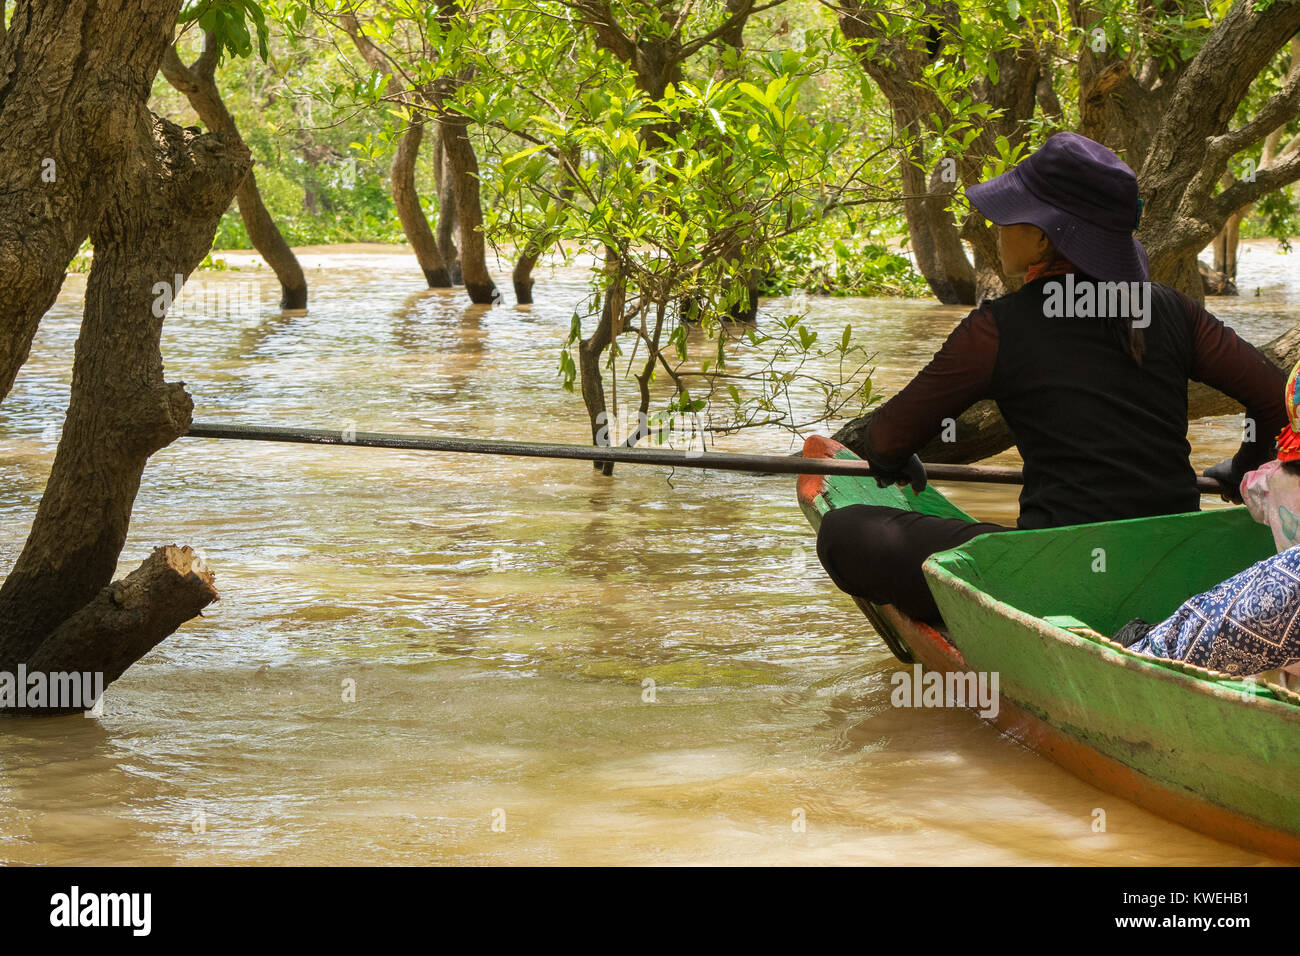 Asian Cambodian woman wearing black and a hat paddling a canoe, exploring floating forest flooded forest in Kampong Phluk, Tonle Sap Lake Cambodia Stock Photo